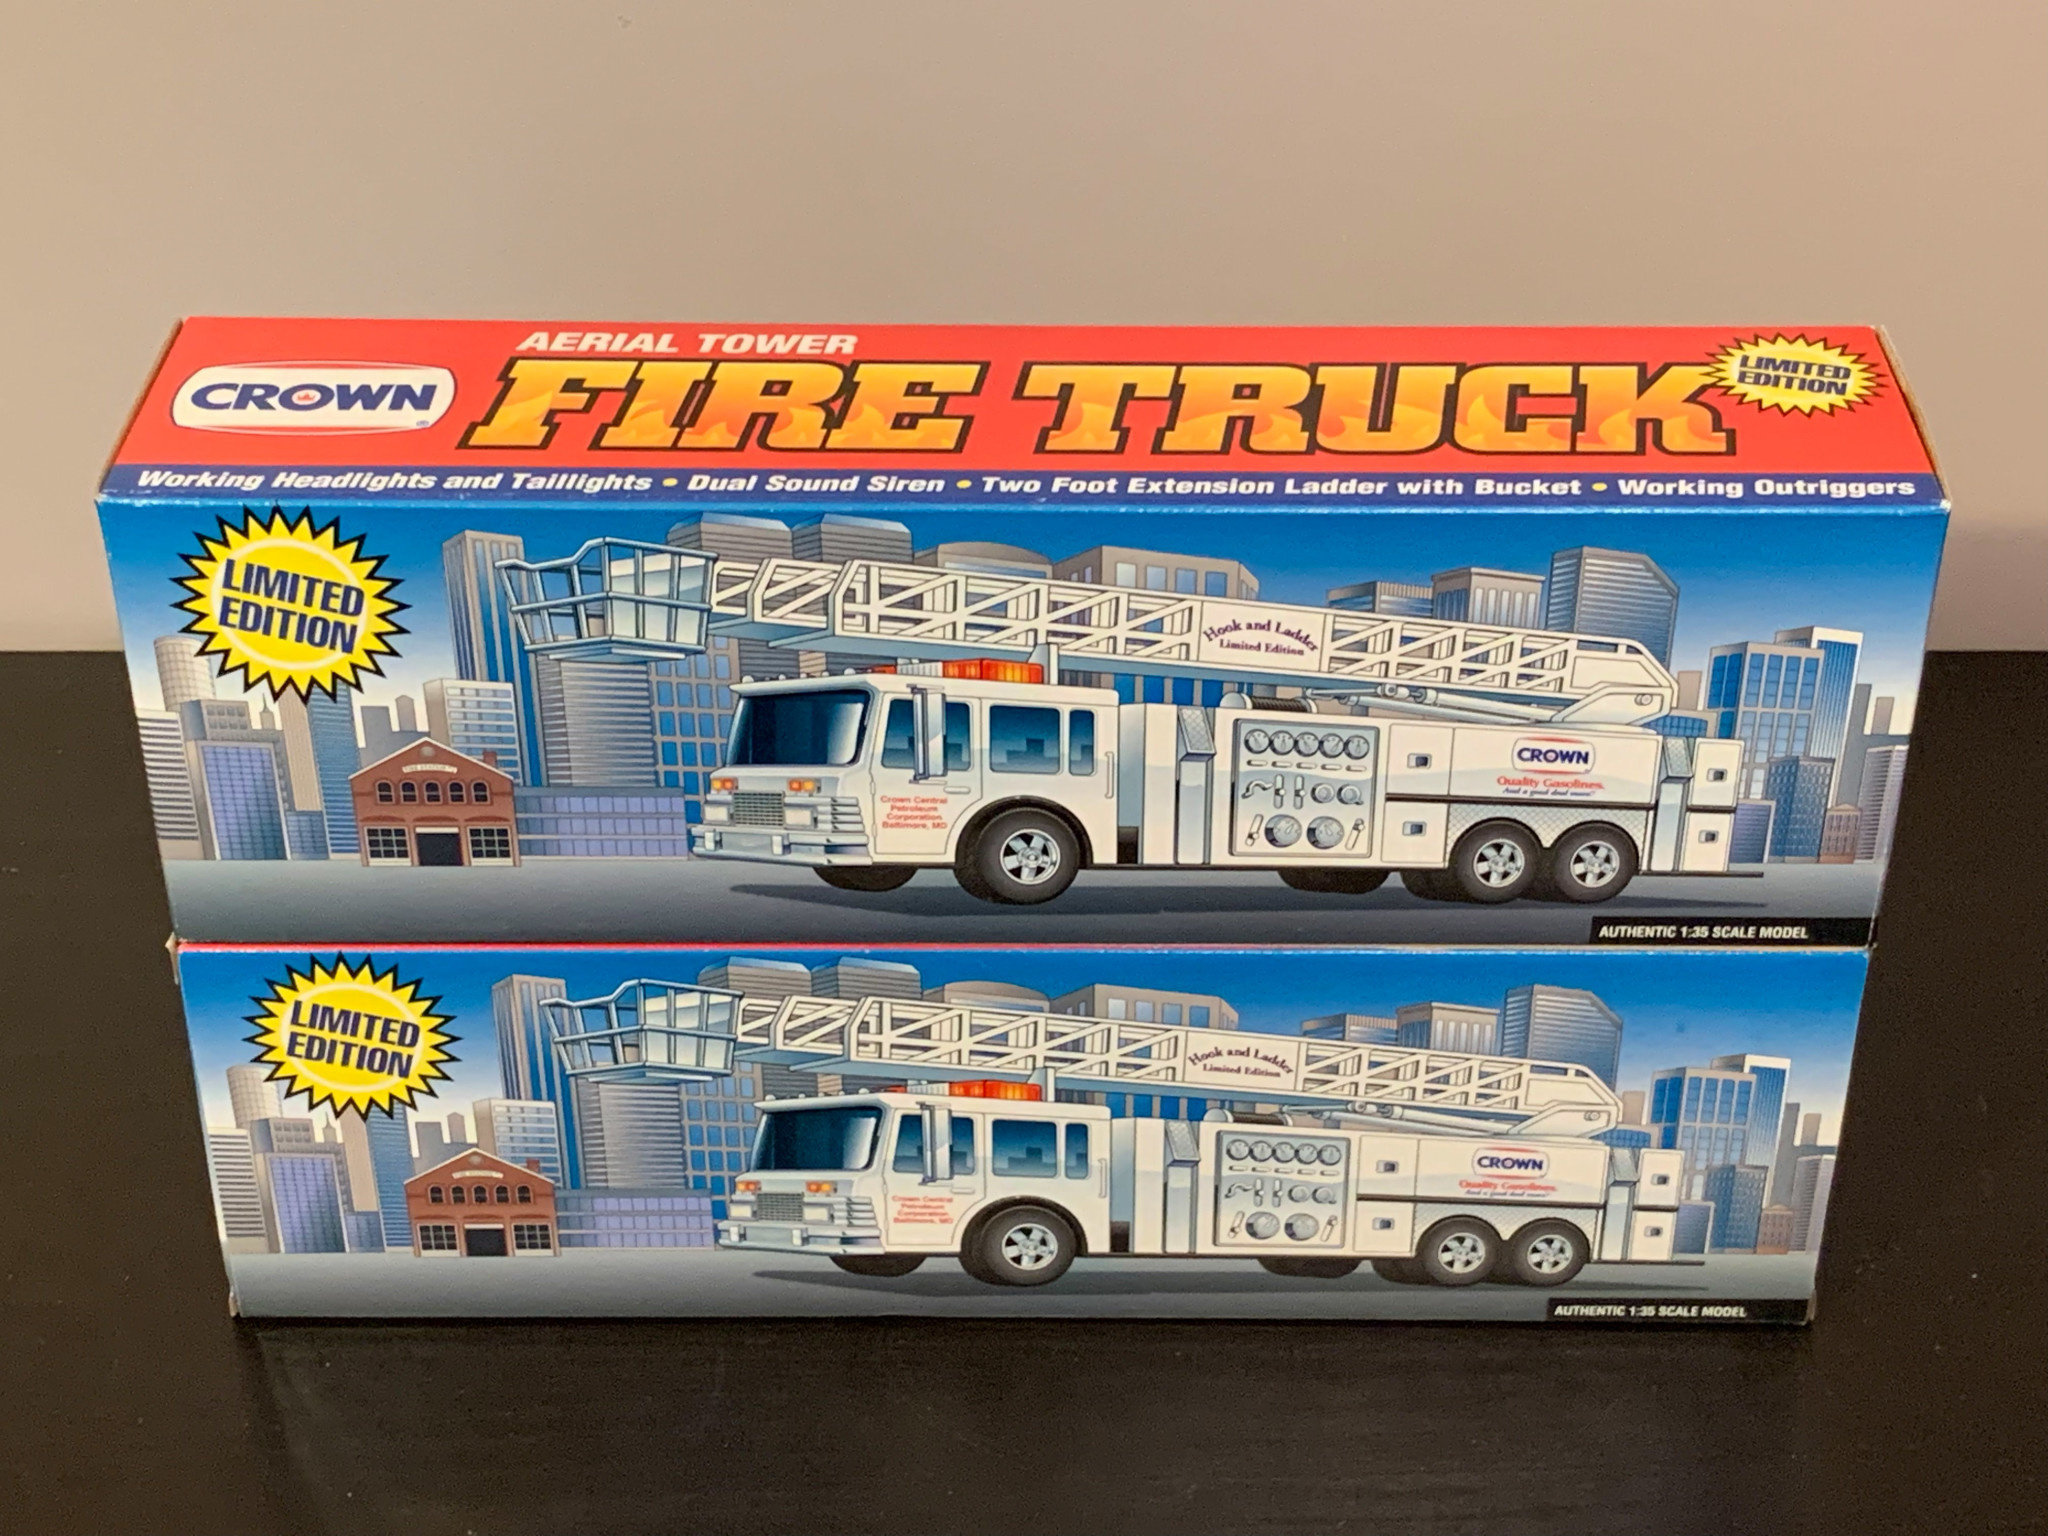 Crown 1996 Aerial Tower Fire Truck